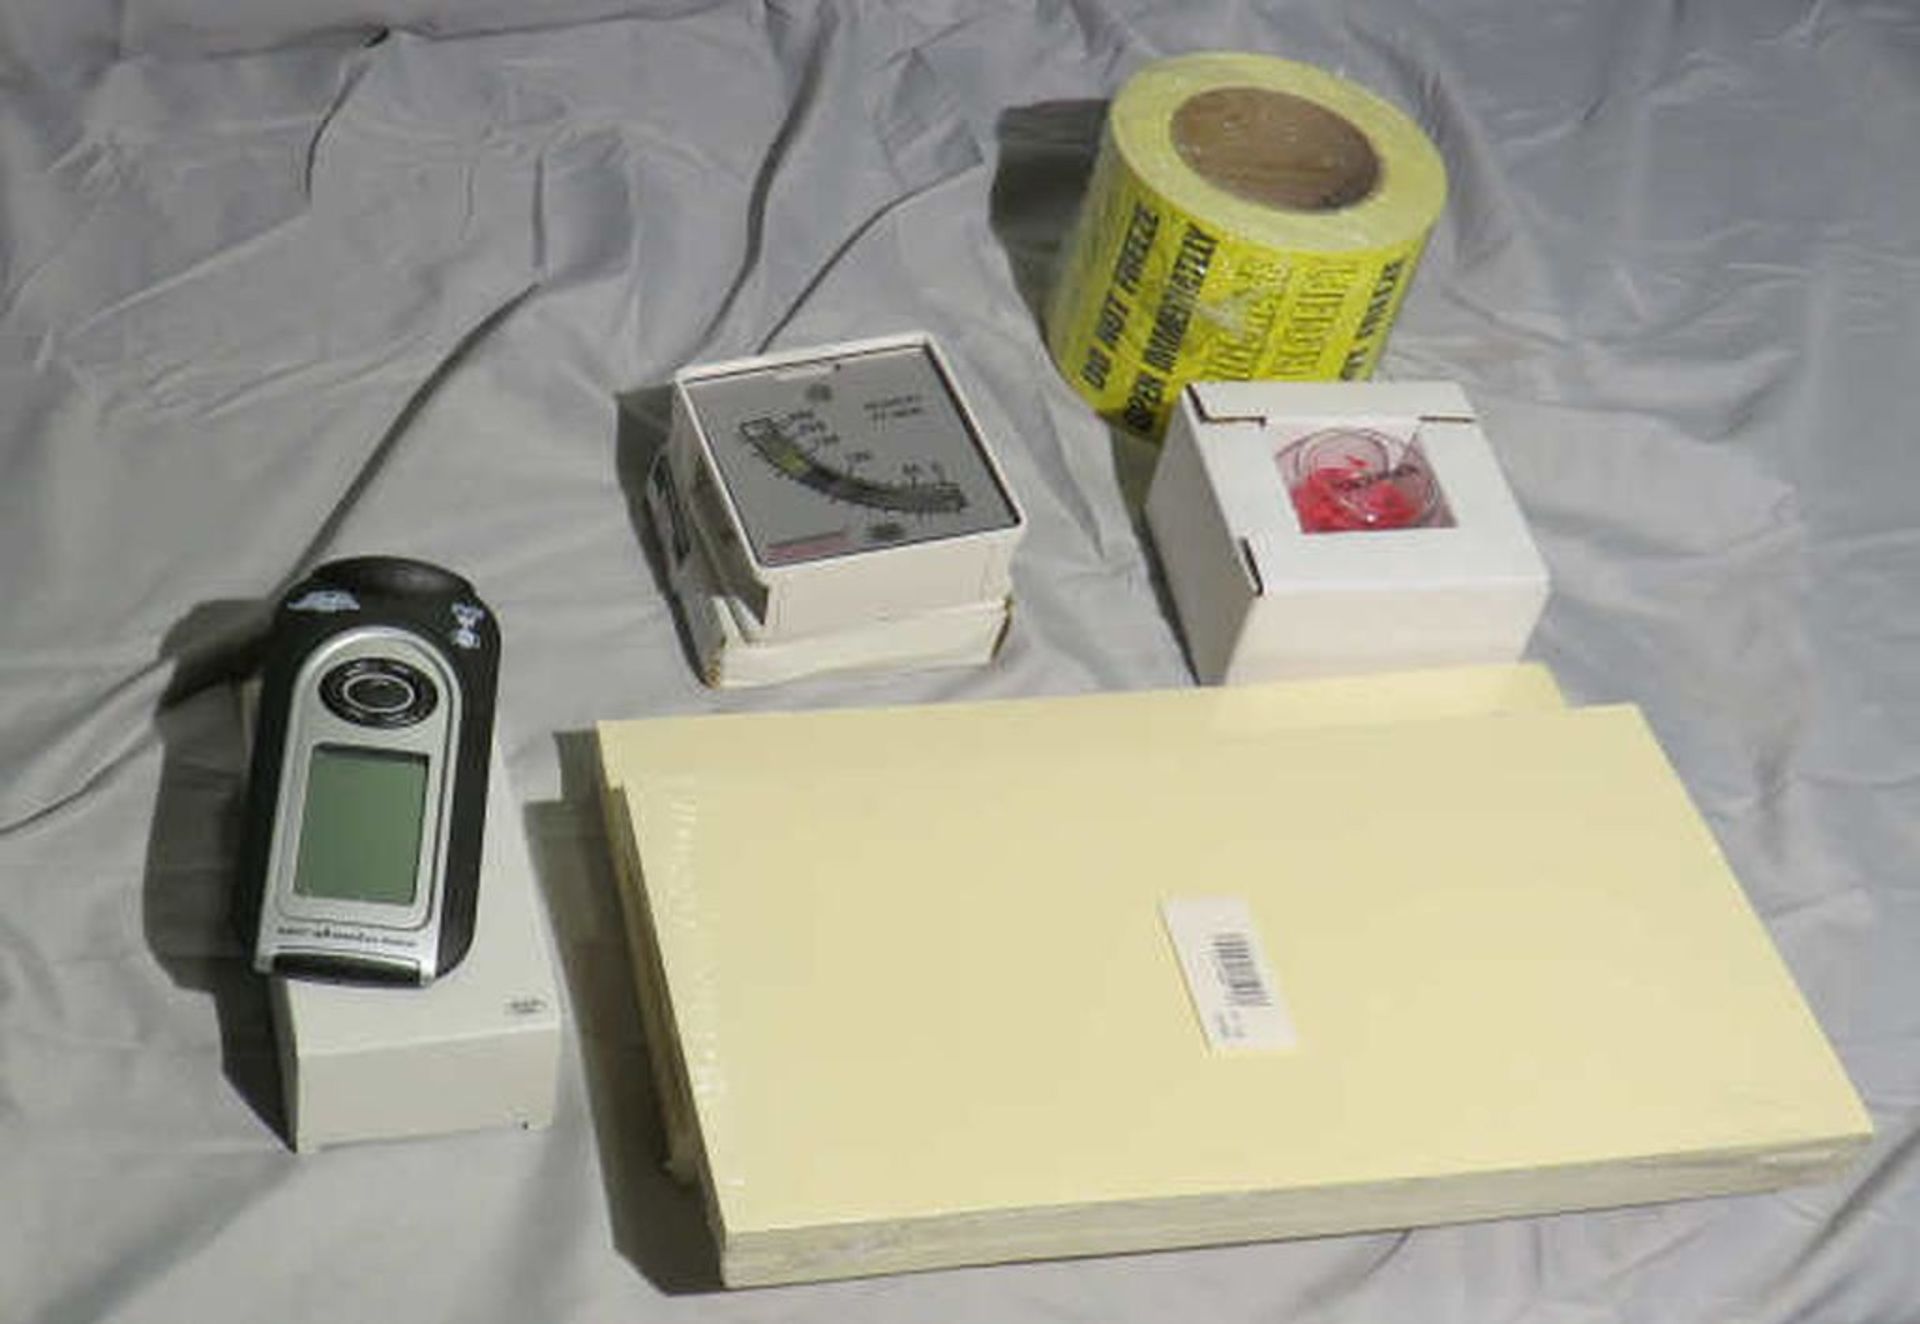 new supplies cardboard, scale, gauge roll of do not freeze tape